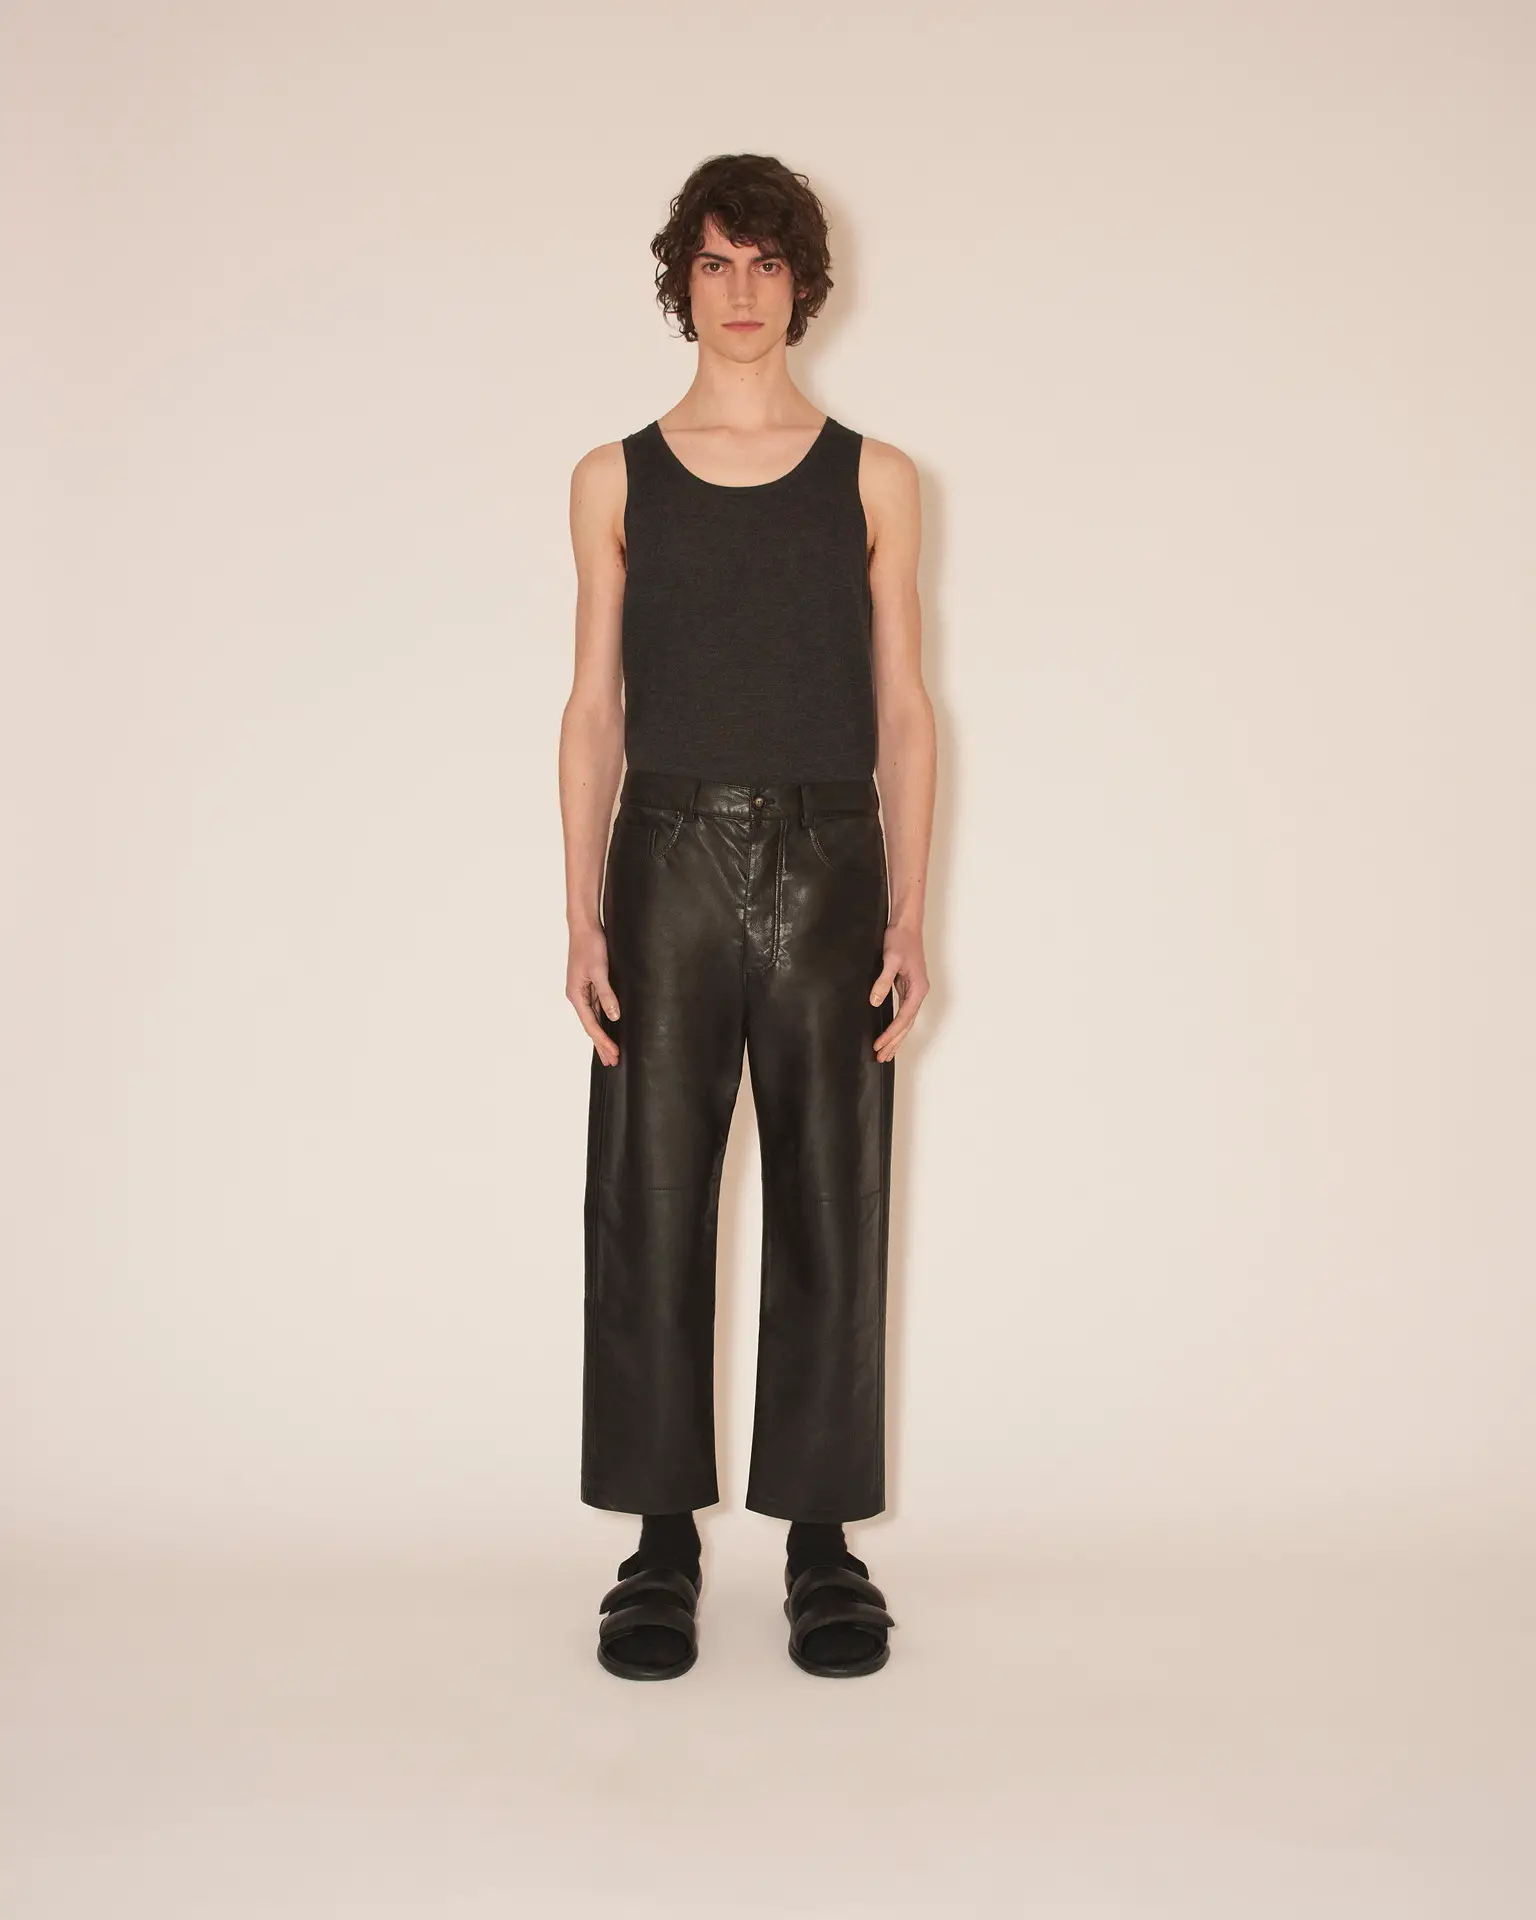 Black leather pants with a black sleeveless crop top